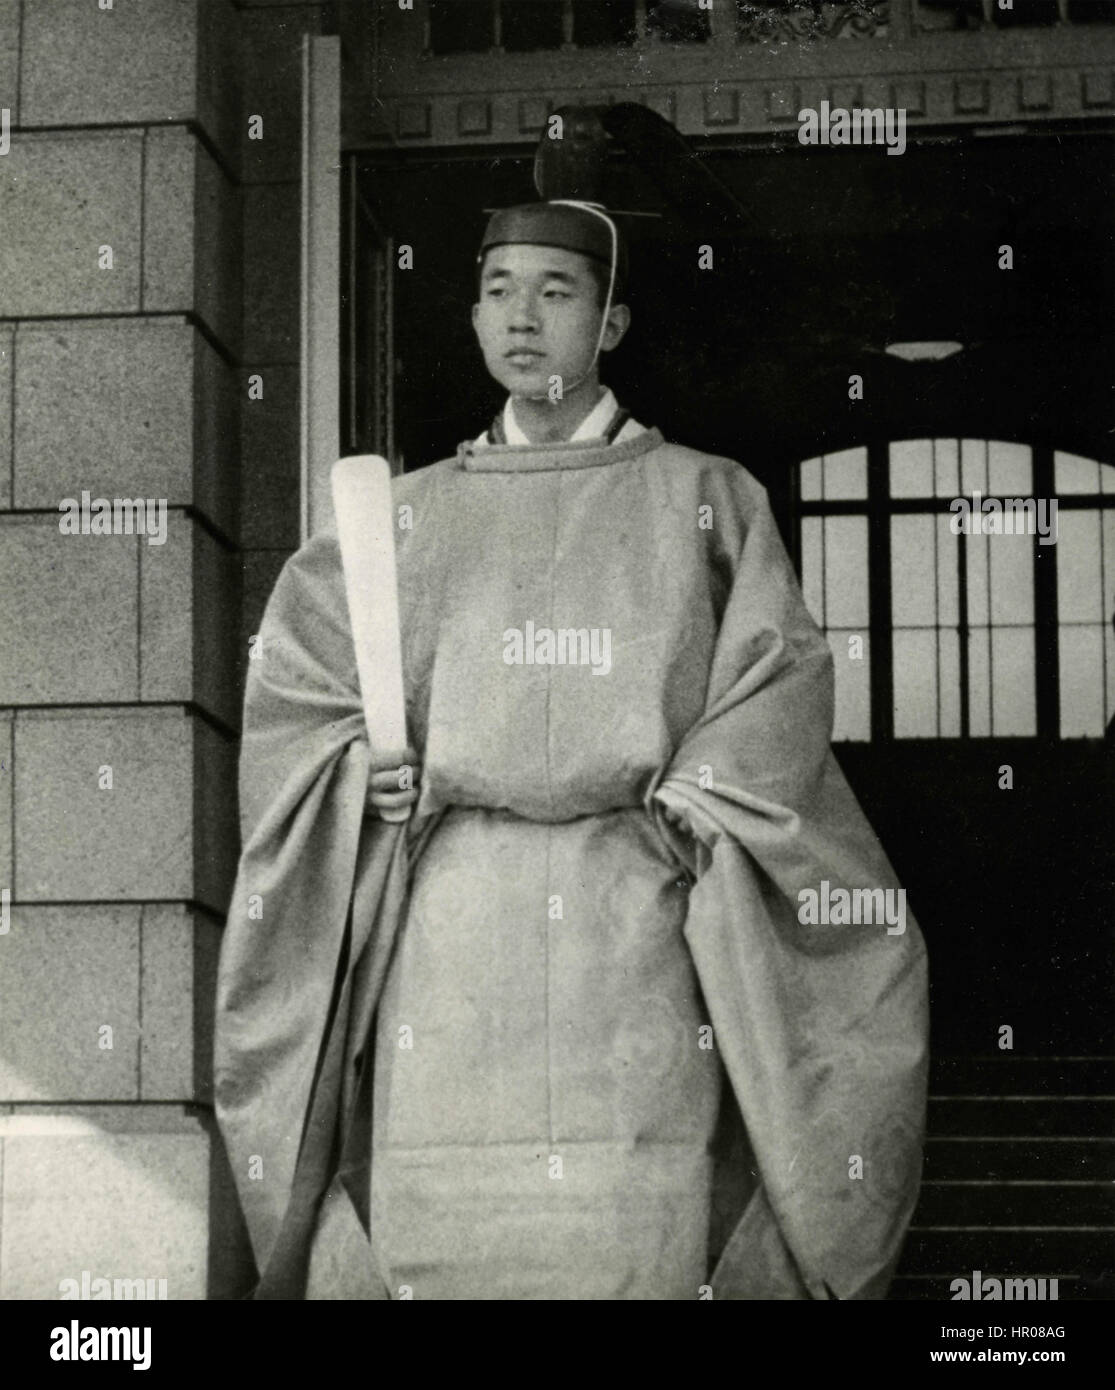 Prince Akihito proclaimed heir to the imperial throne, Japan 1952 Stock Photo